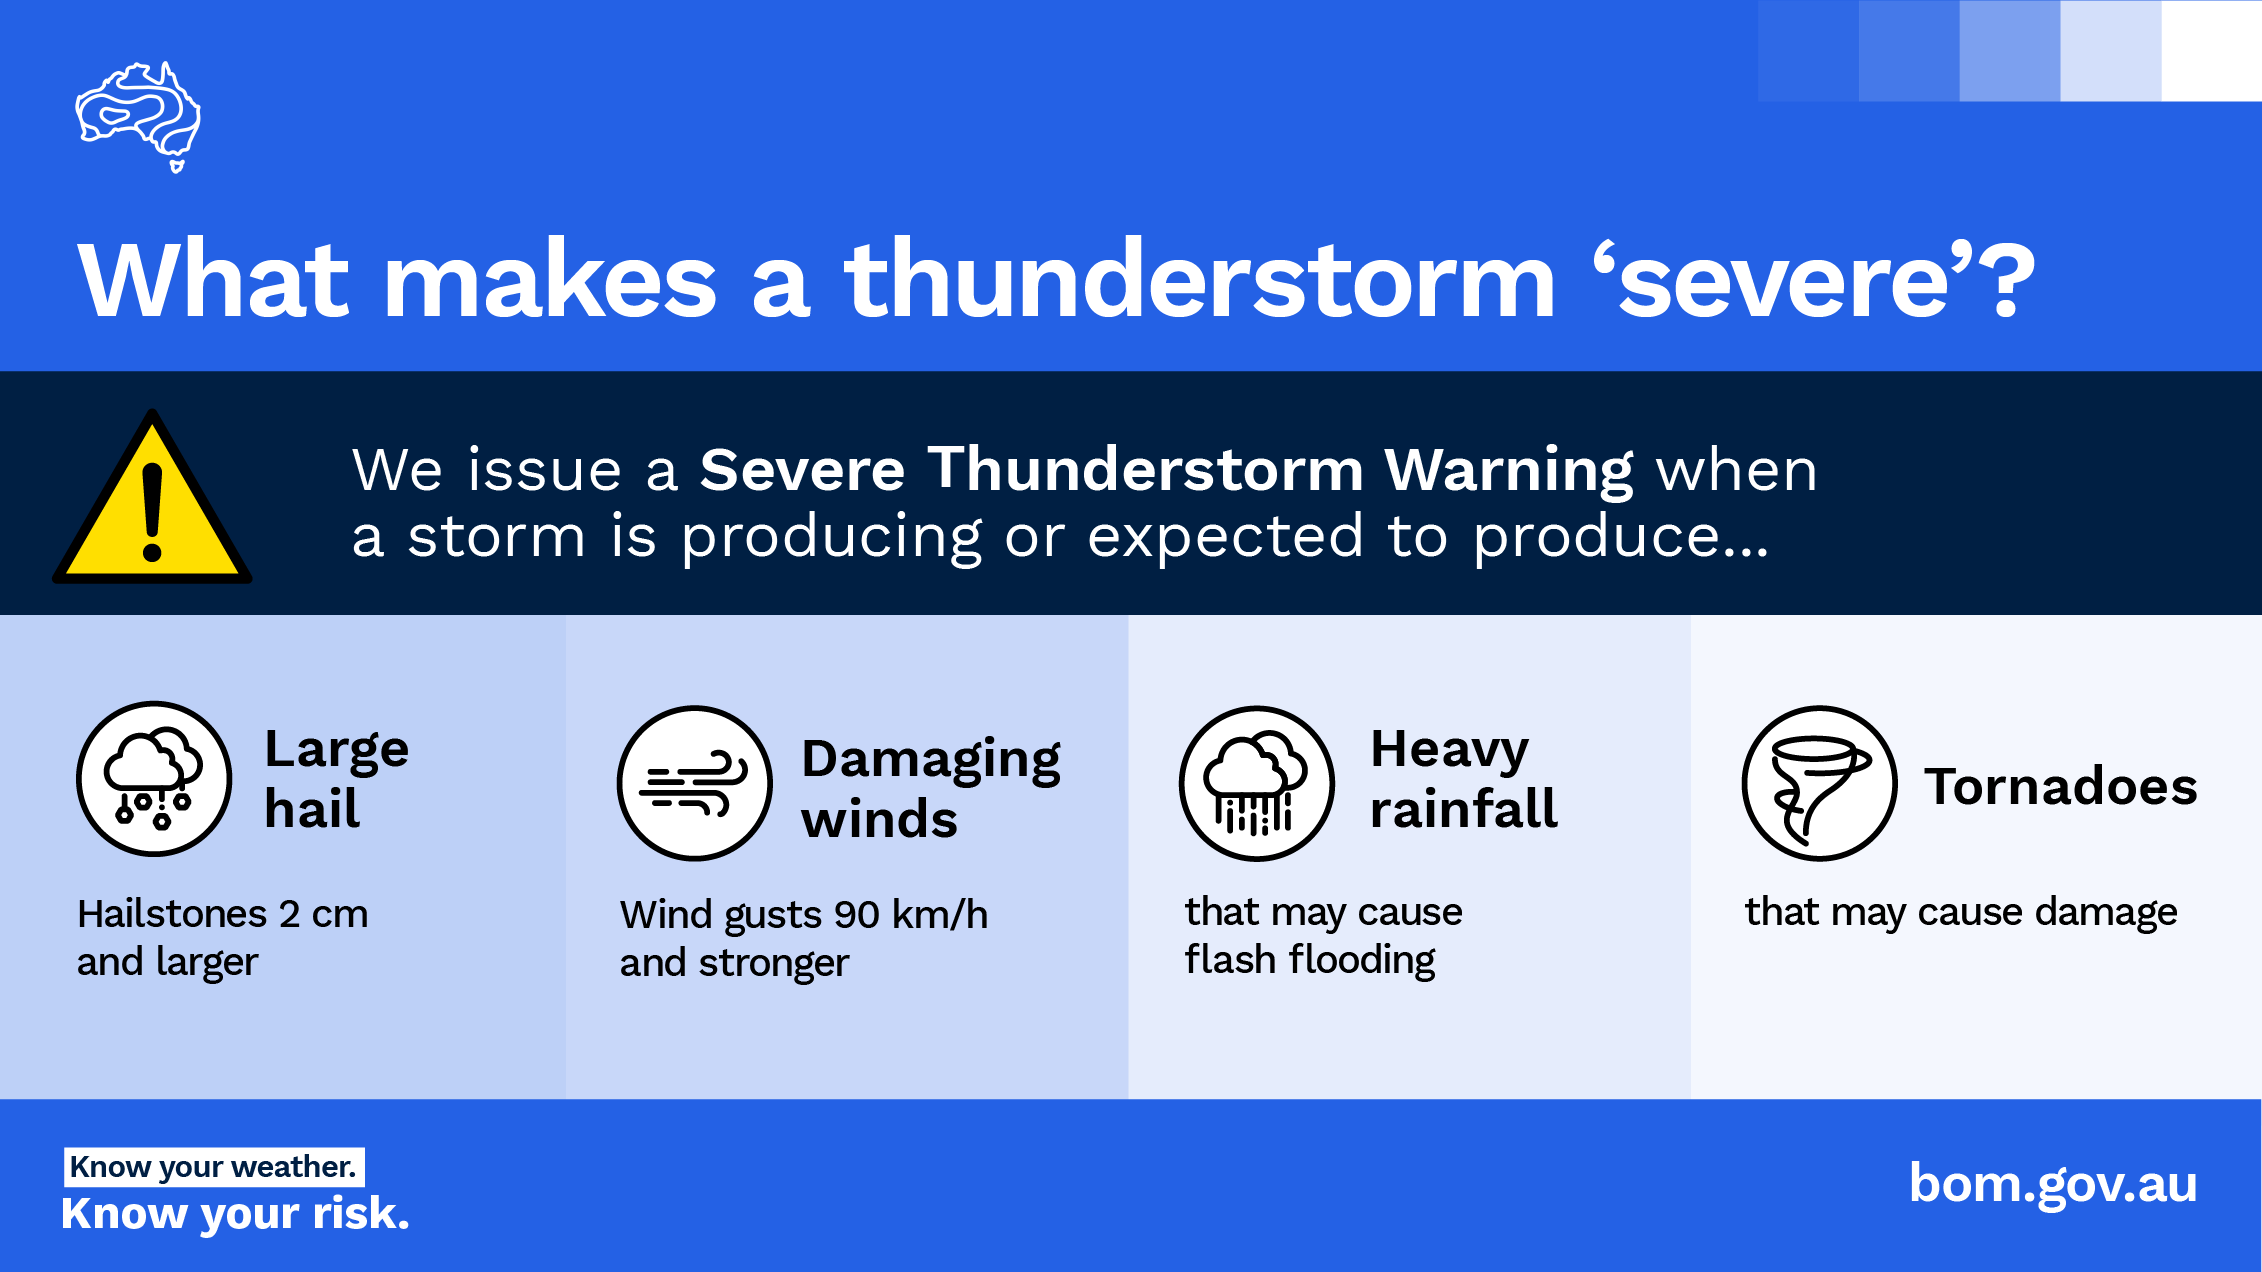 Graphic with text describing what makes a thunderstorm severe. Repeats information covered in text.